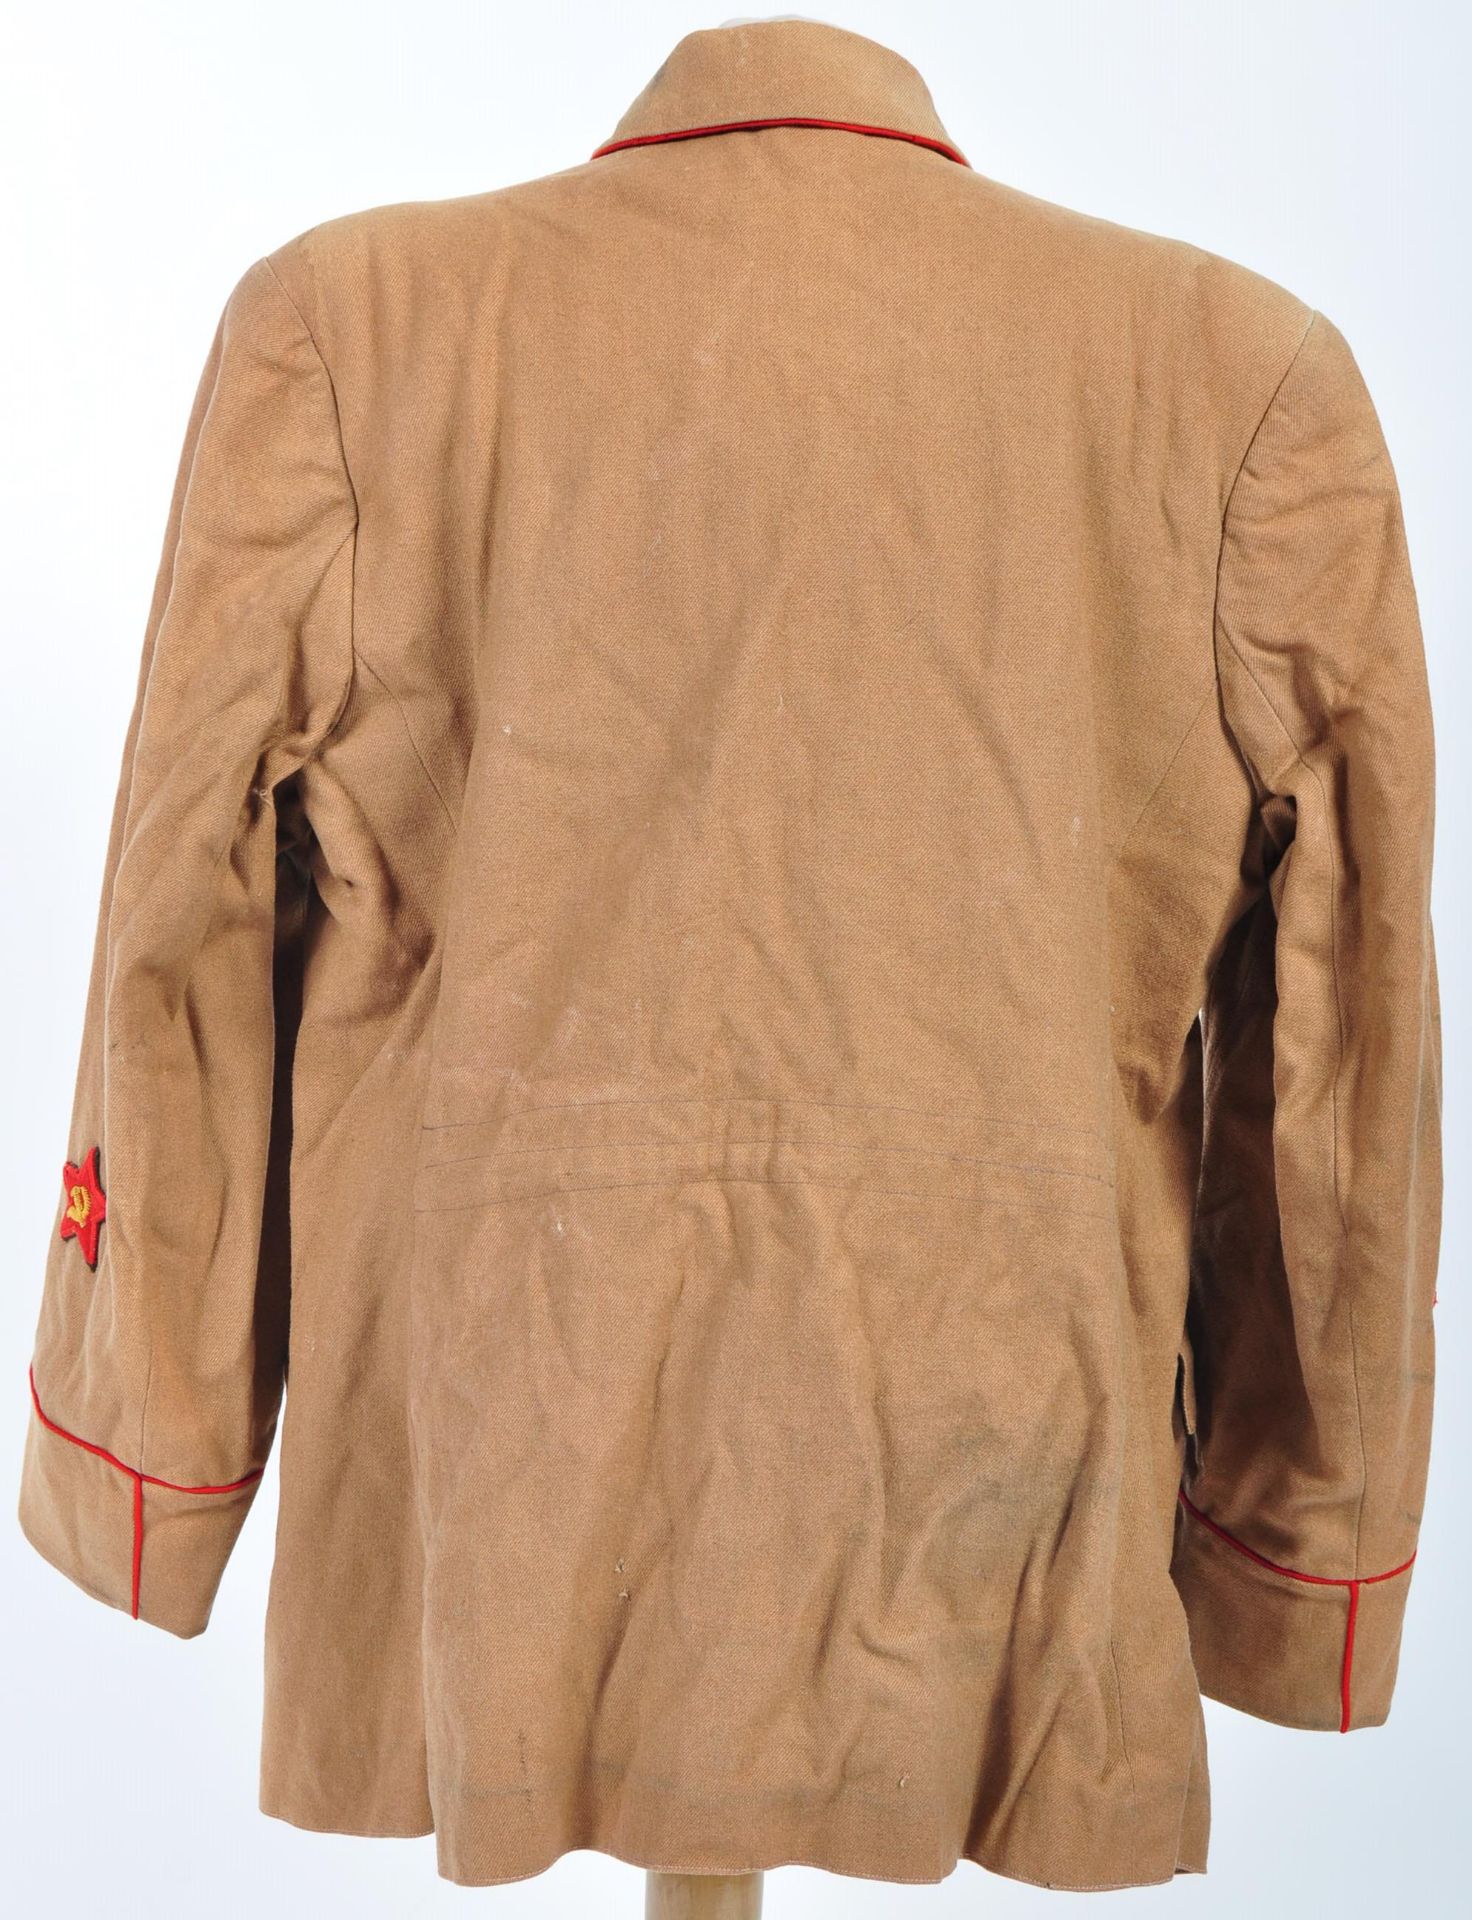 EARLY RUSSIAN SOVIET UNION RED GUARD PATTERN UNIFORM - Image 6 of 8